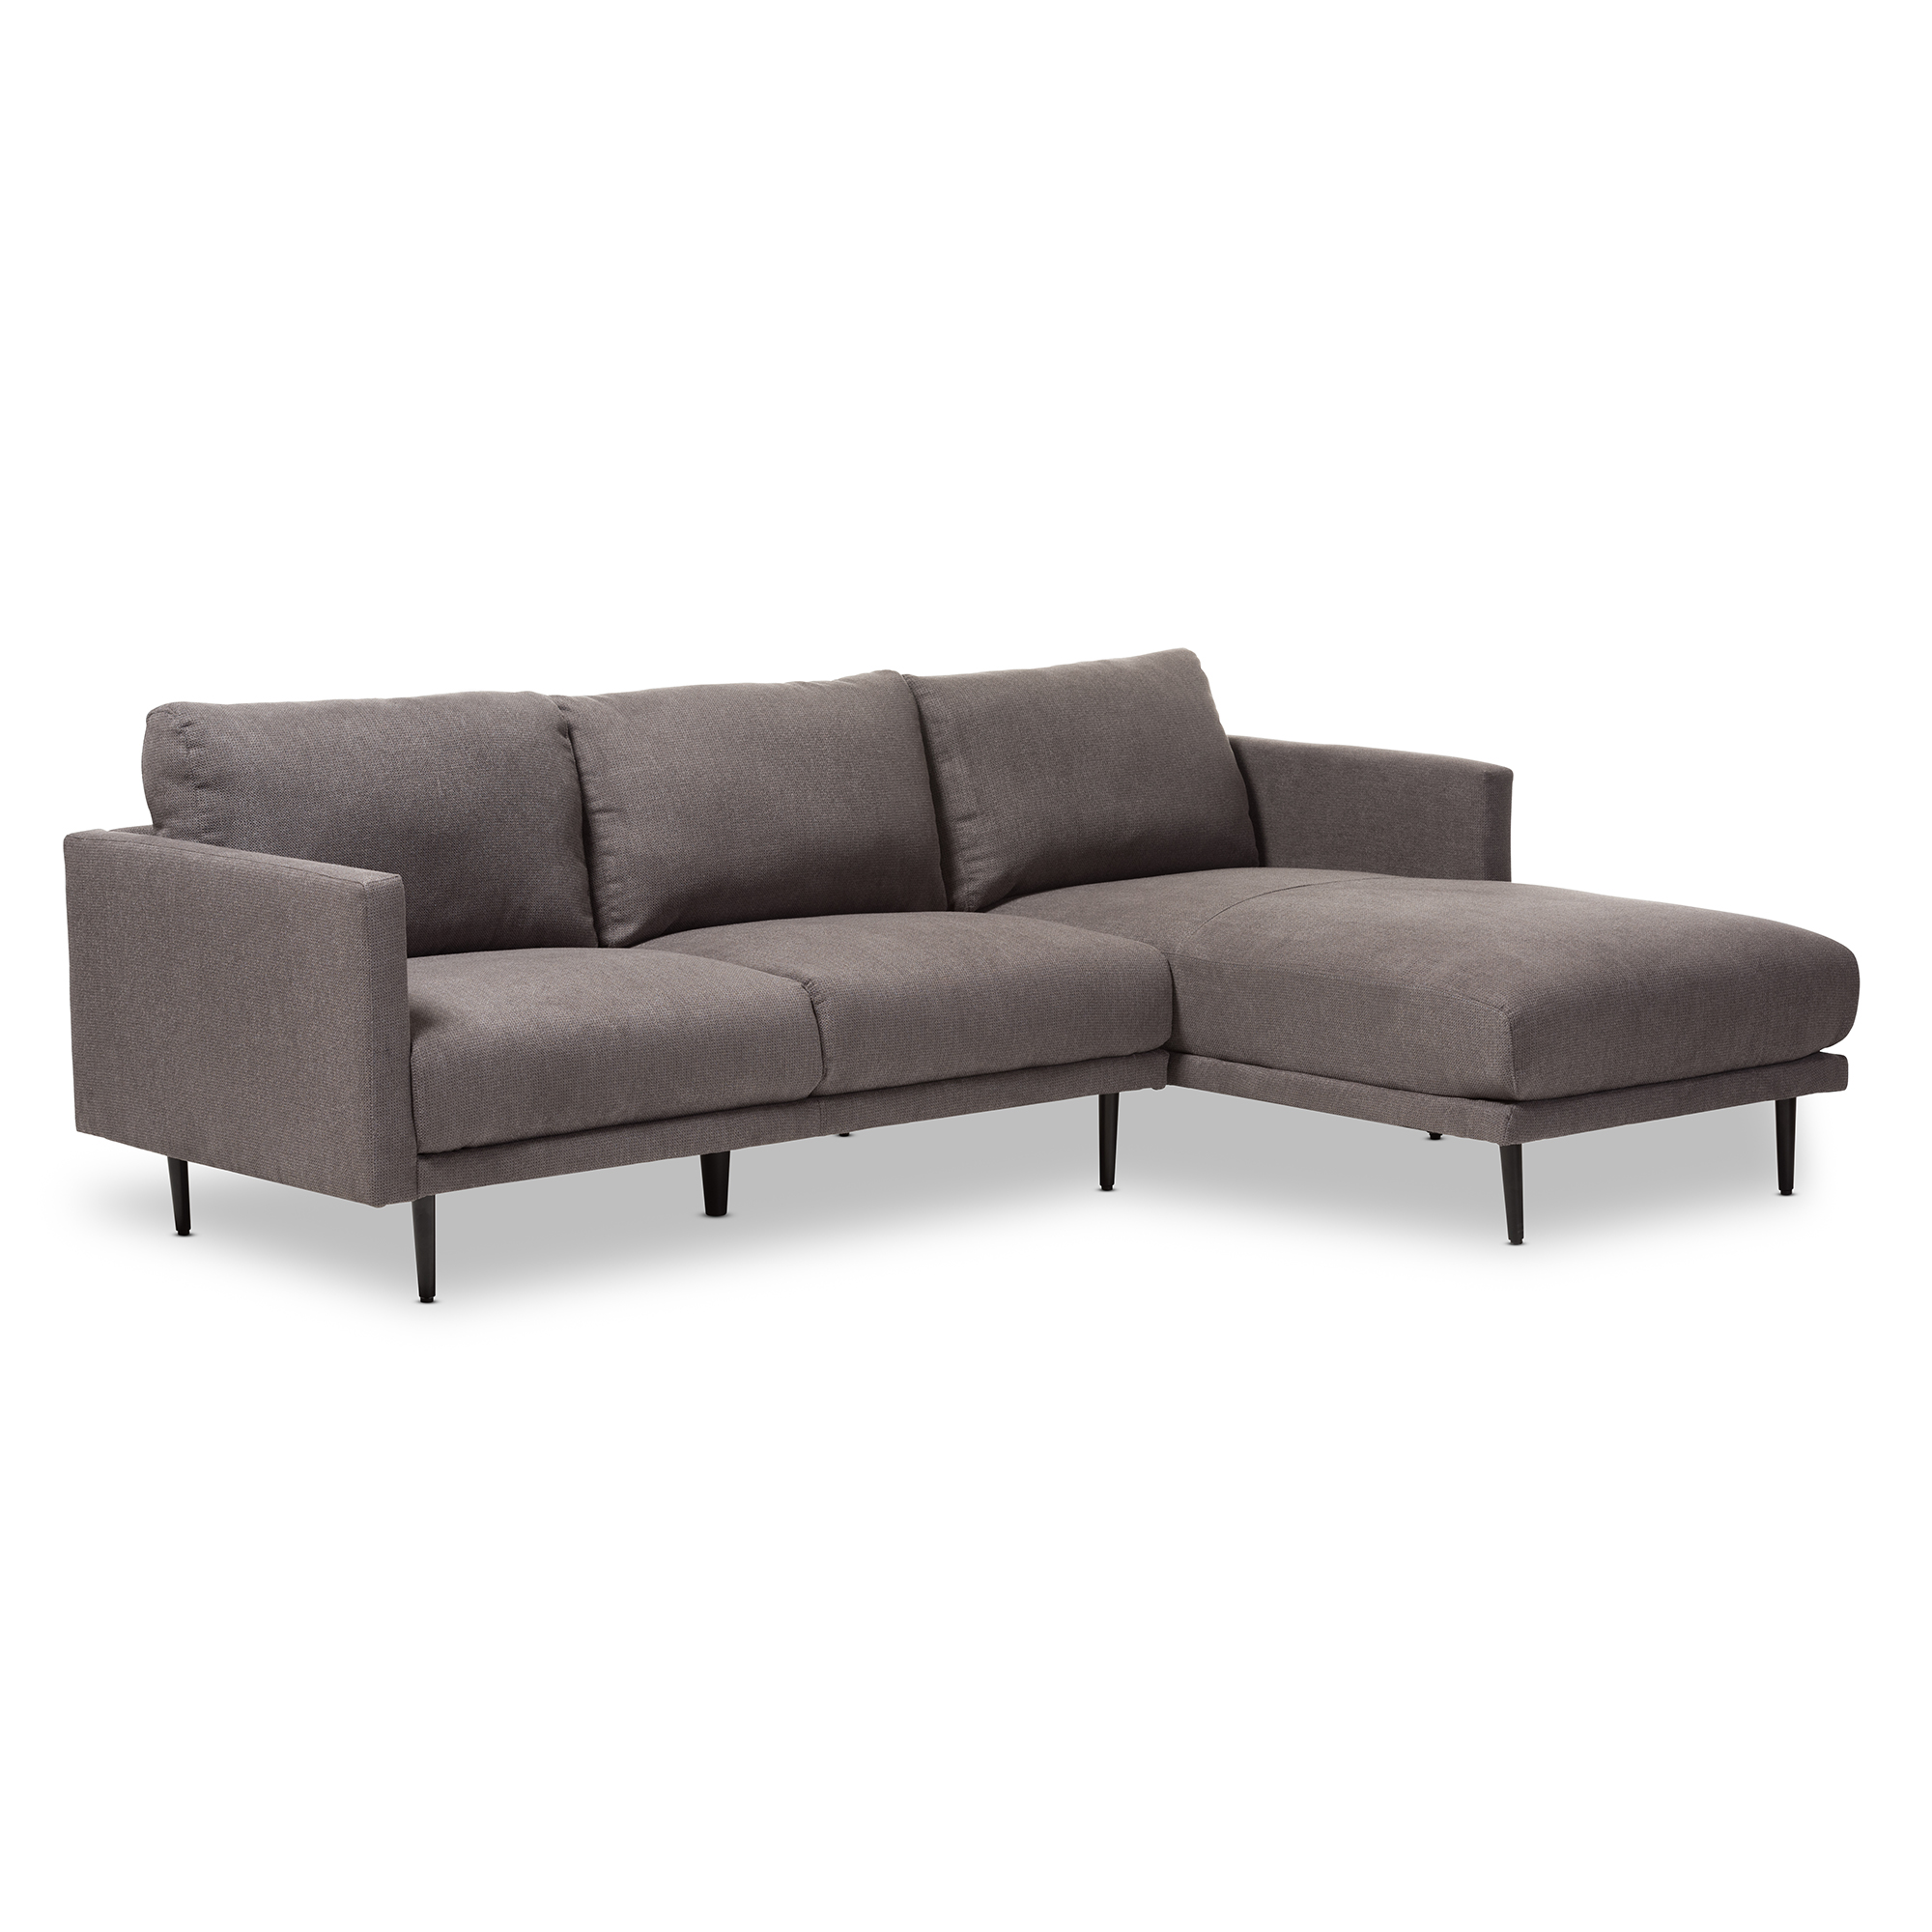 Baxton Studio Riley Retro Mid-Century Modern Grey Fabric Upholstered Right Facing Chaise Sectional Sofa